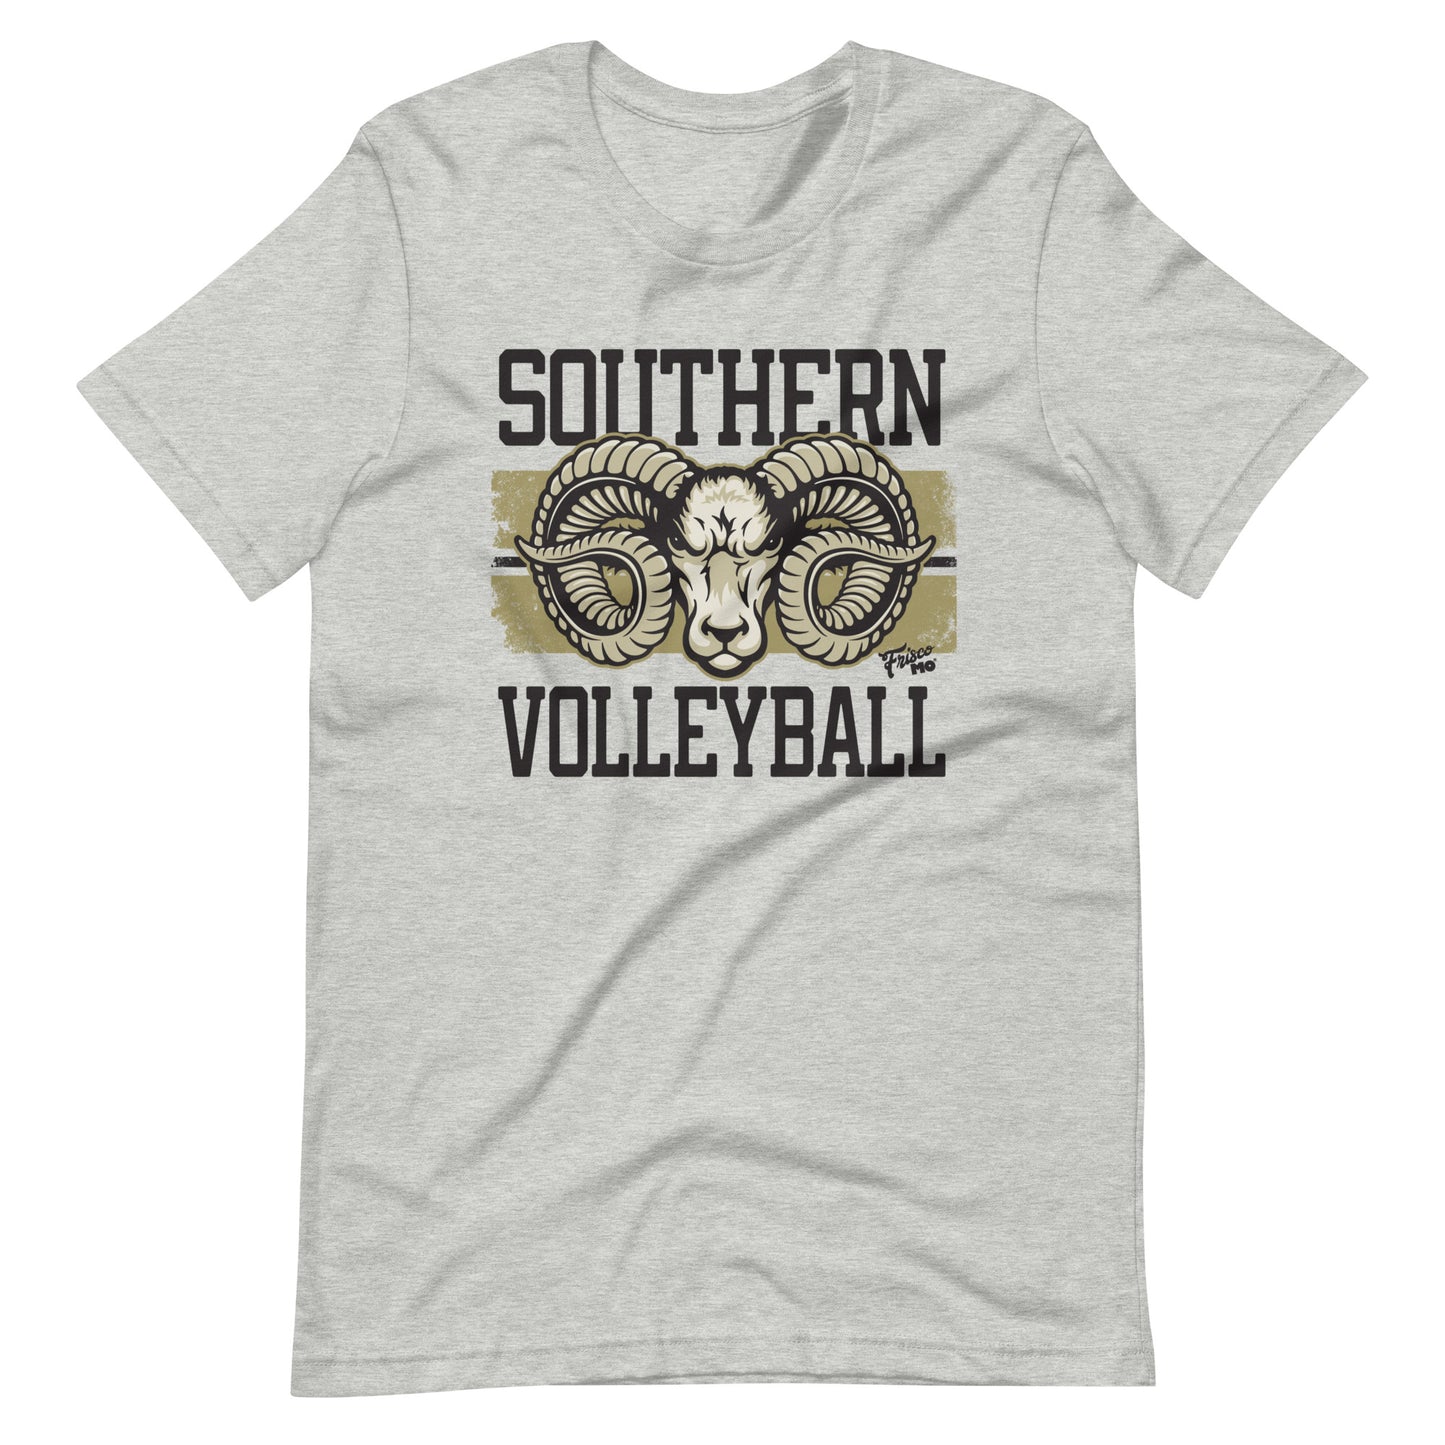 Southern Volleyball Tee